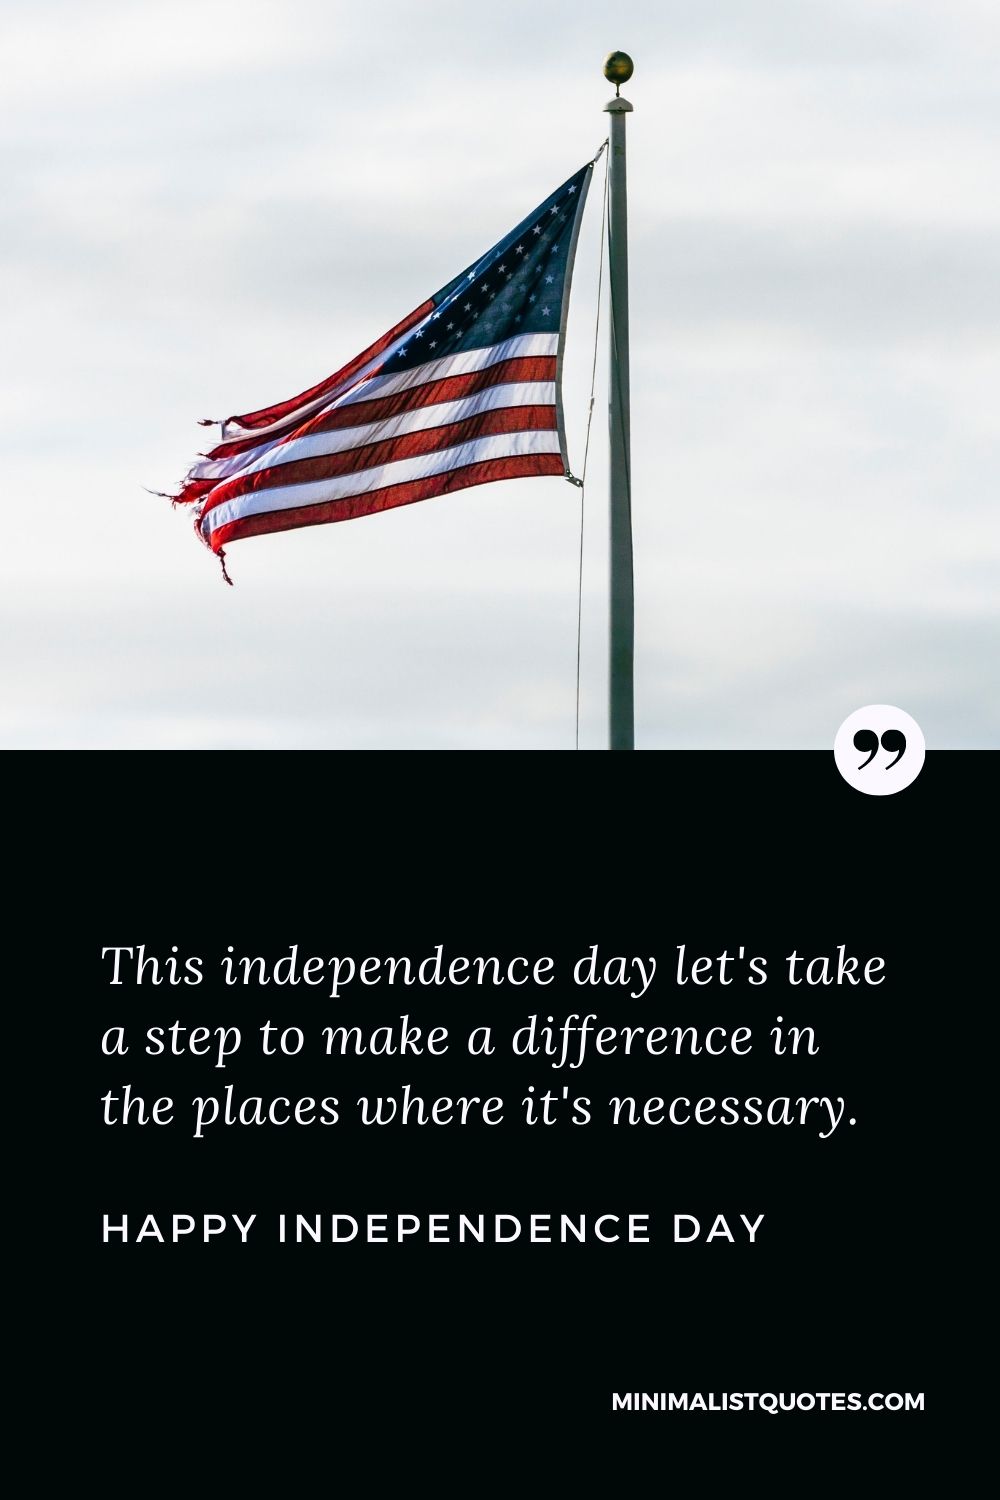 Independence day wish, quote & message with image: This independence day let's take a step to make a difference in the places where it's necessary. Happy Independence Day!